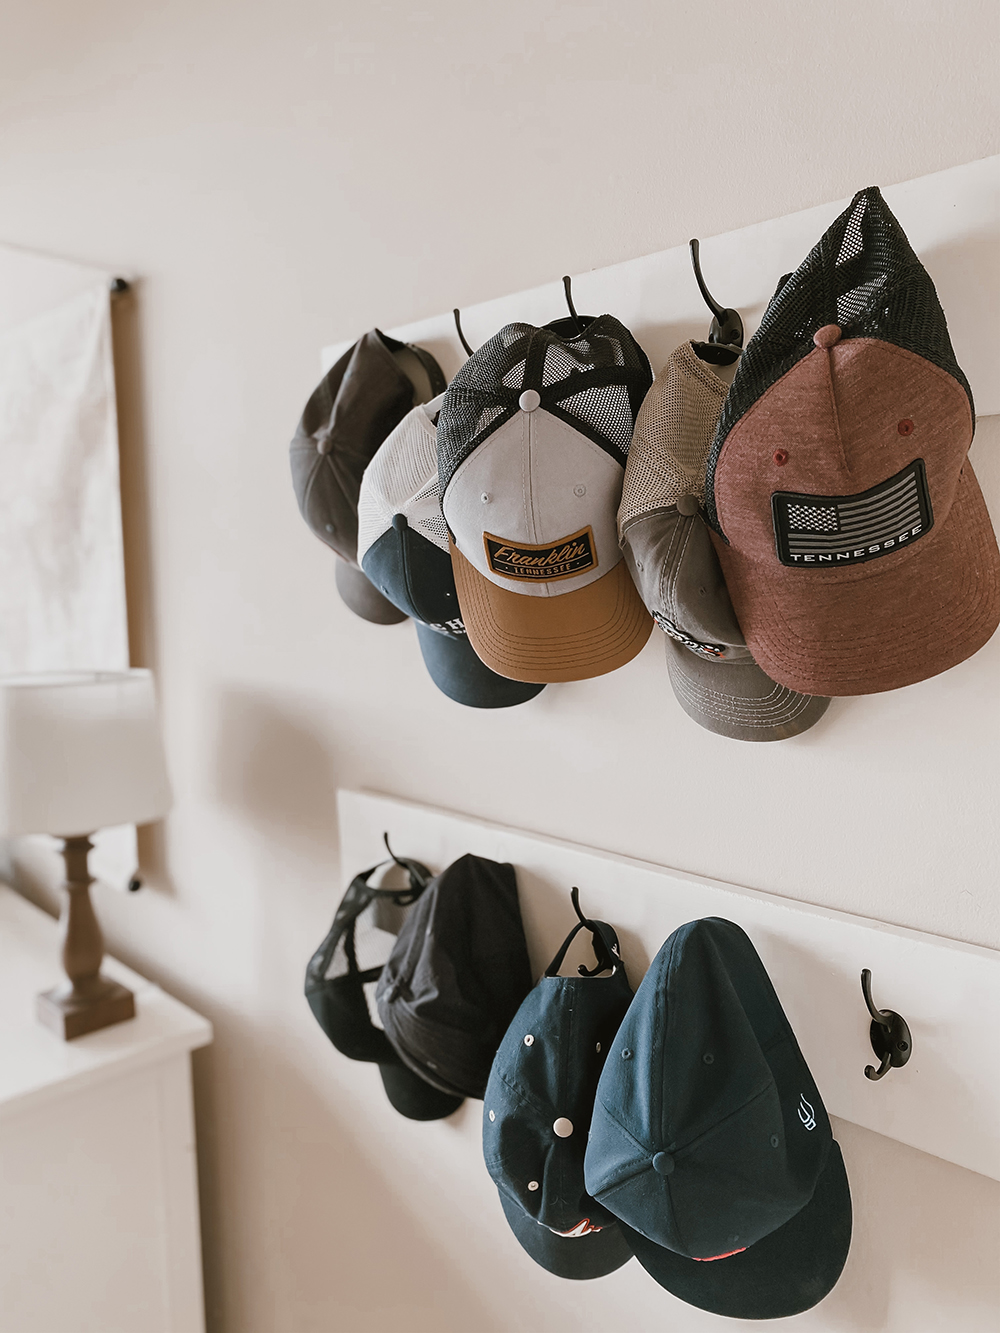 Simple, classic, and a solution to a problem. We made a DIY hat rack for the boys room and I love the end result and the added decor it has brought to the space. Sharing a full look into this weekend DIY project over on the blog!